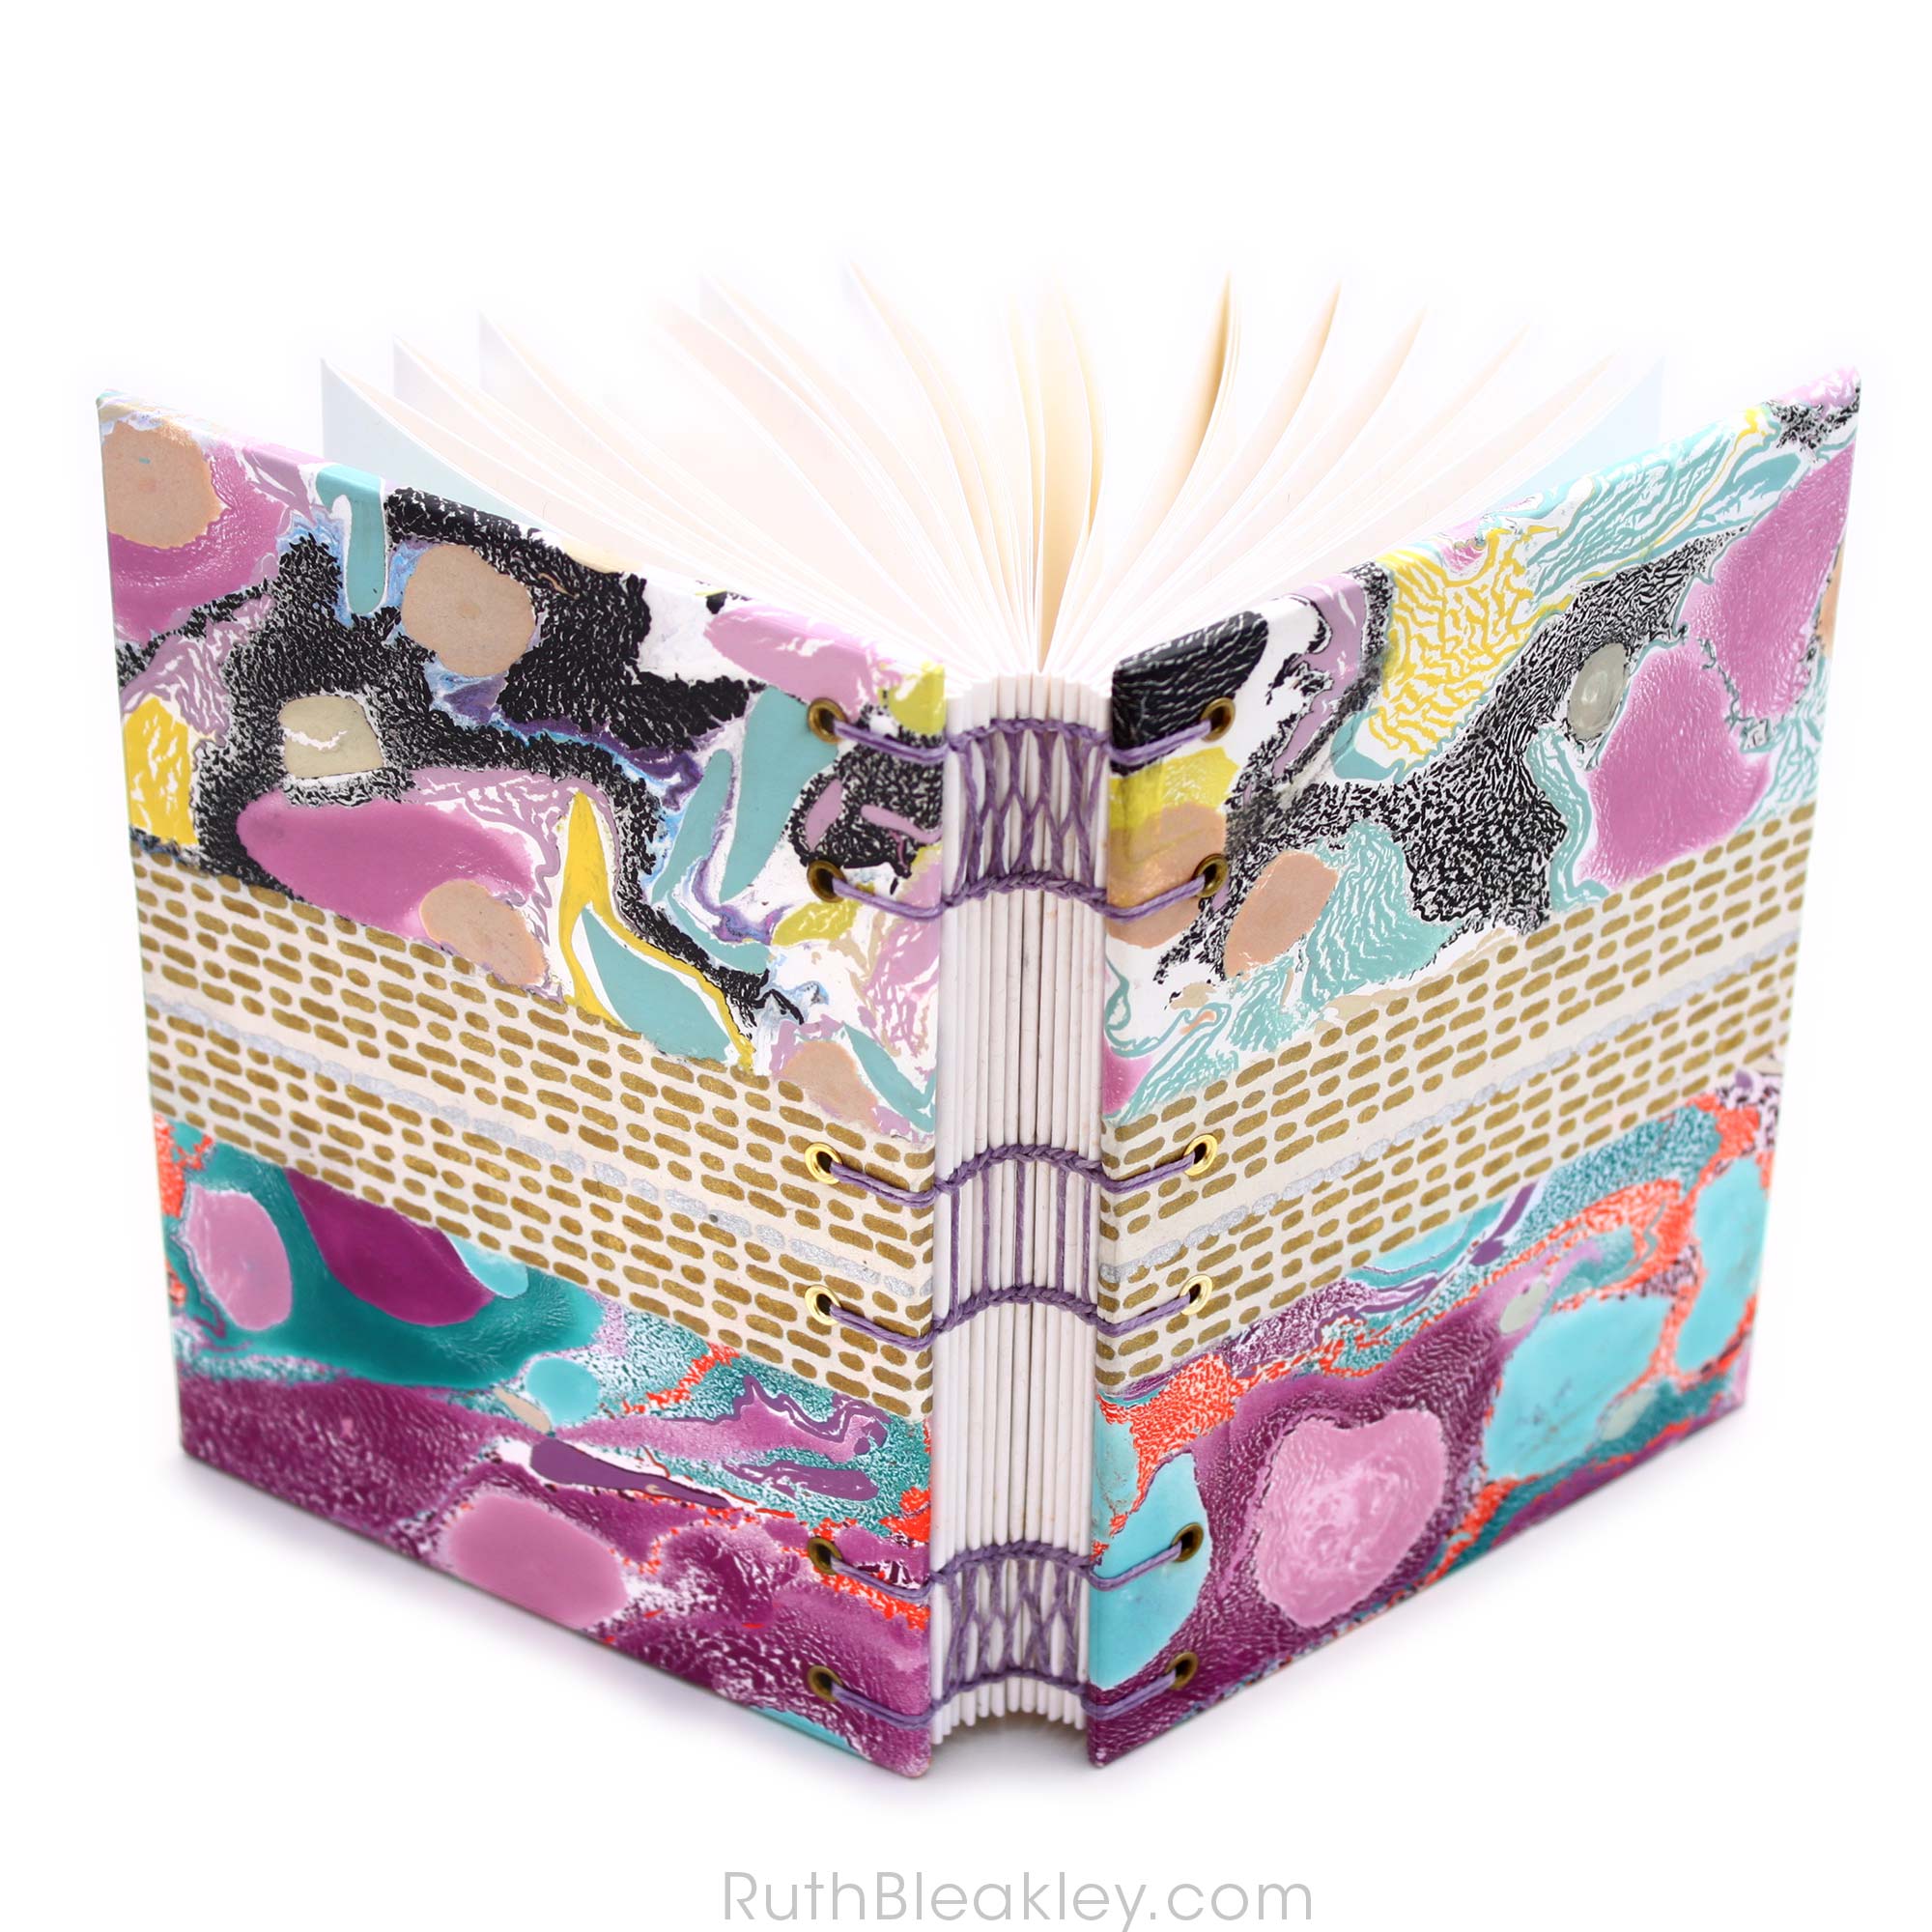 Colorful Memphis Style Marbled Journal by book artist Ruth Bleakley